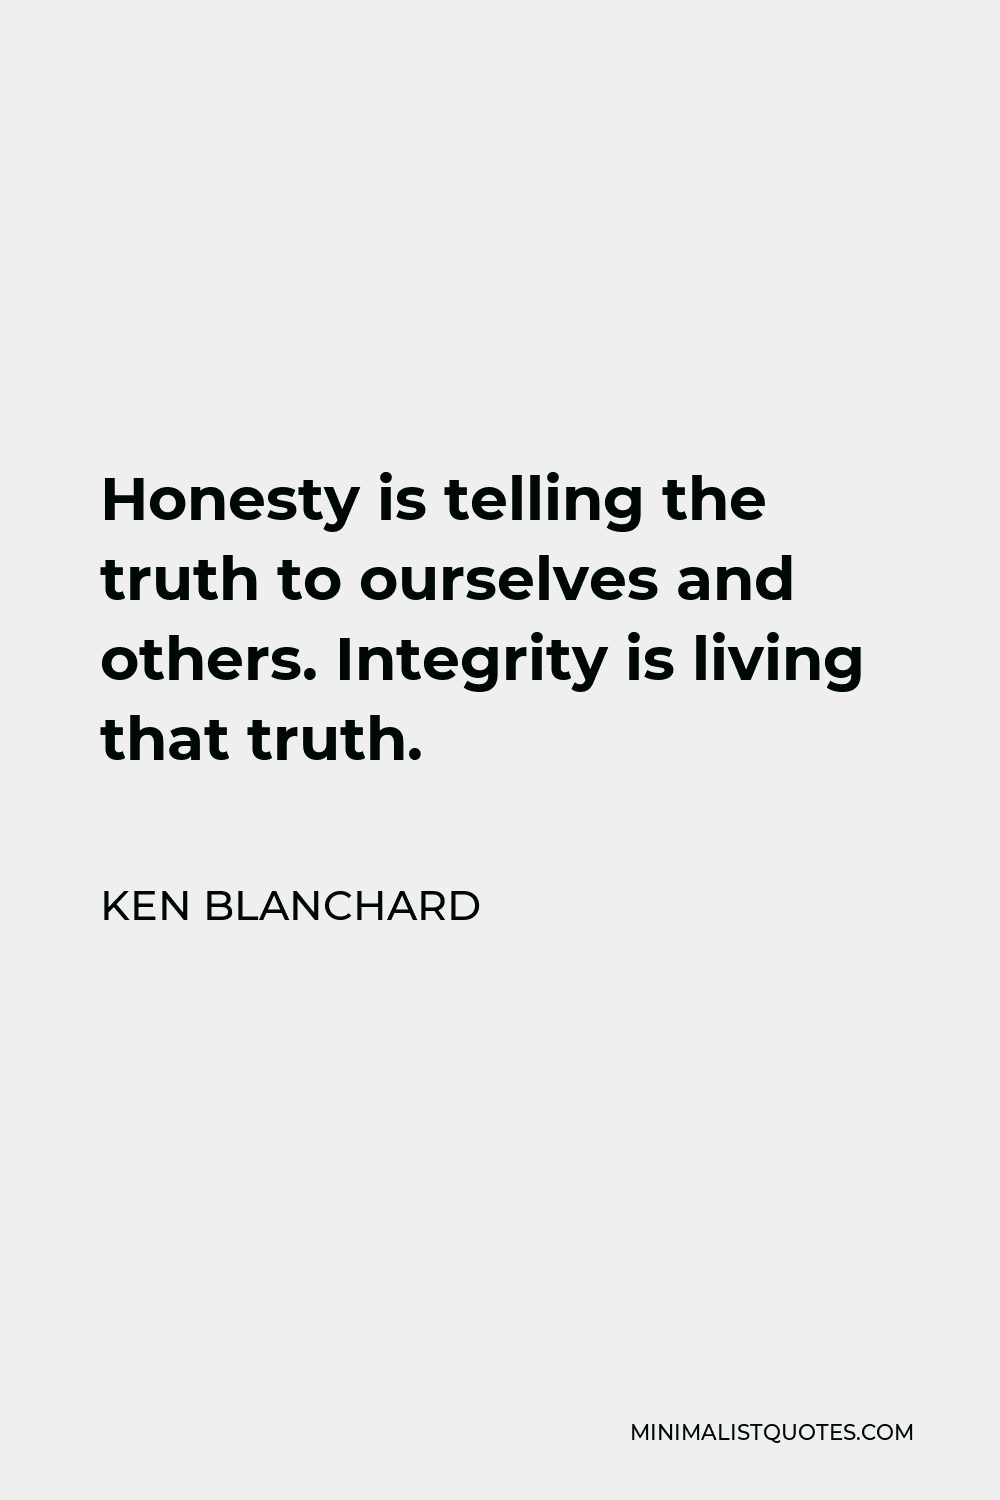 Ken Blanchard Quote - Honesty is telling the truth to ourselves and others. Integrity is living that truth.